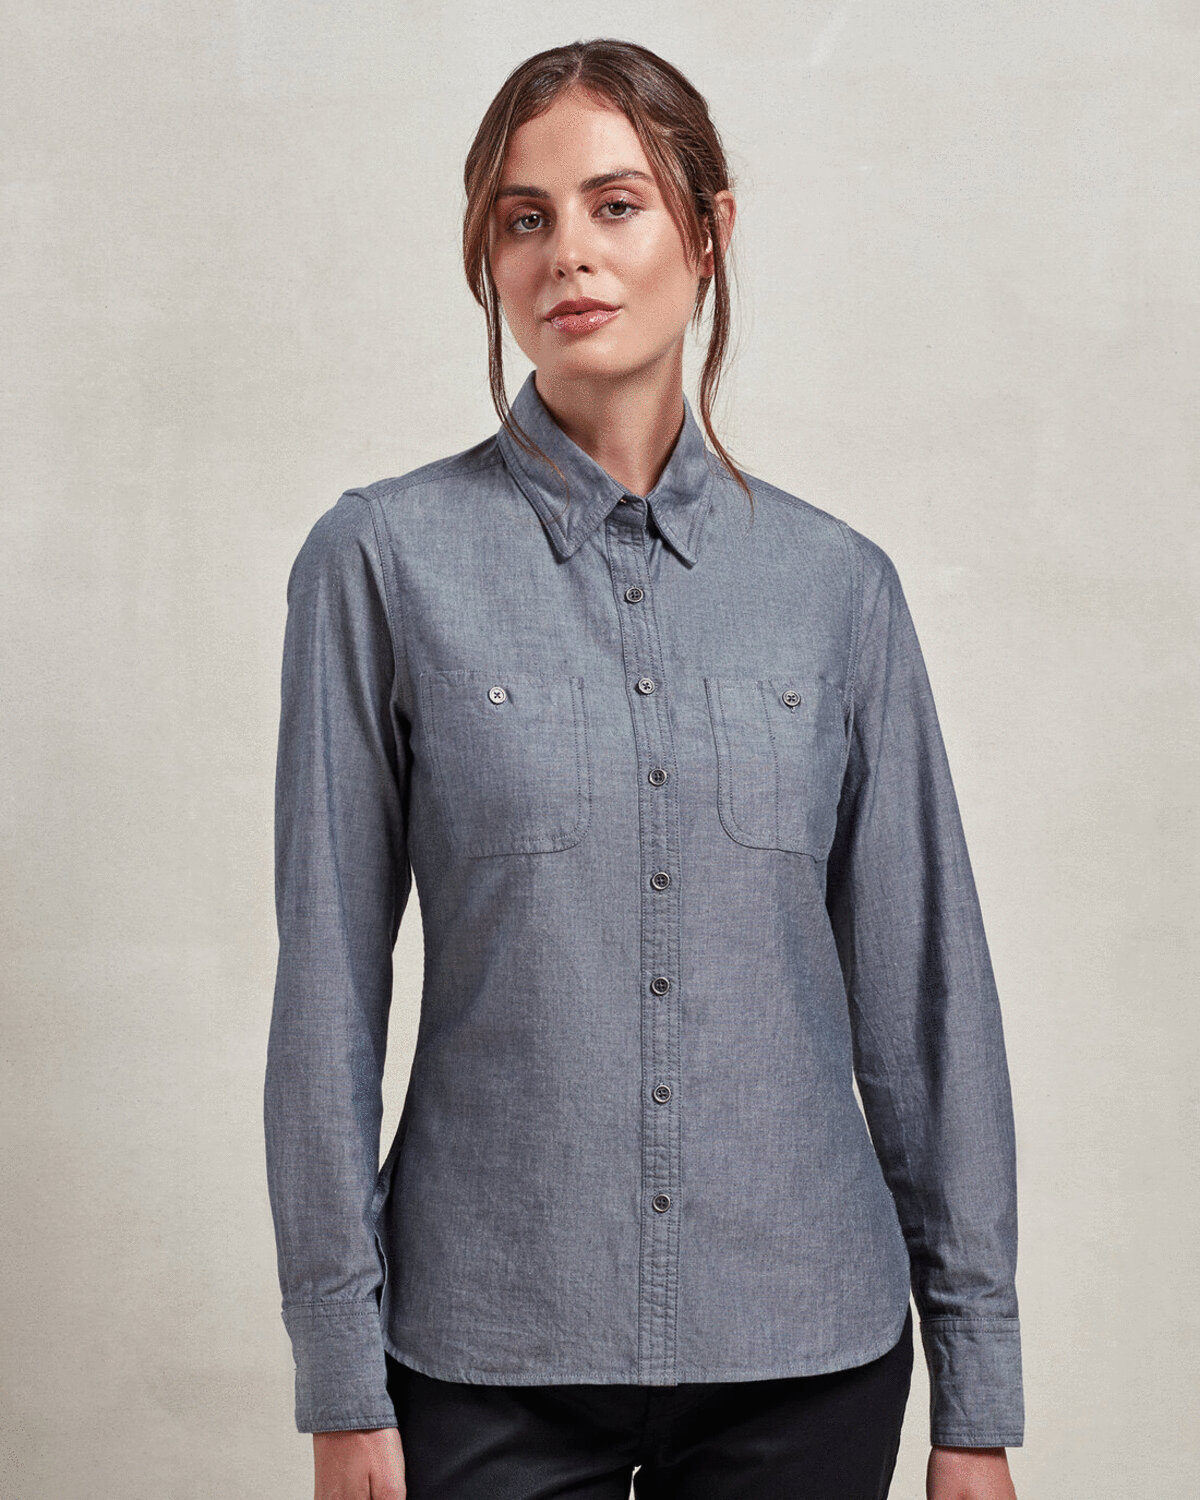 FAIRTRADE AND ORGANIC CERTIFIED LADIES LONG SLEEVE CHAMBRAY COTTON SHIRT